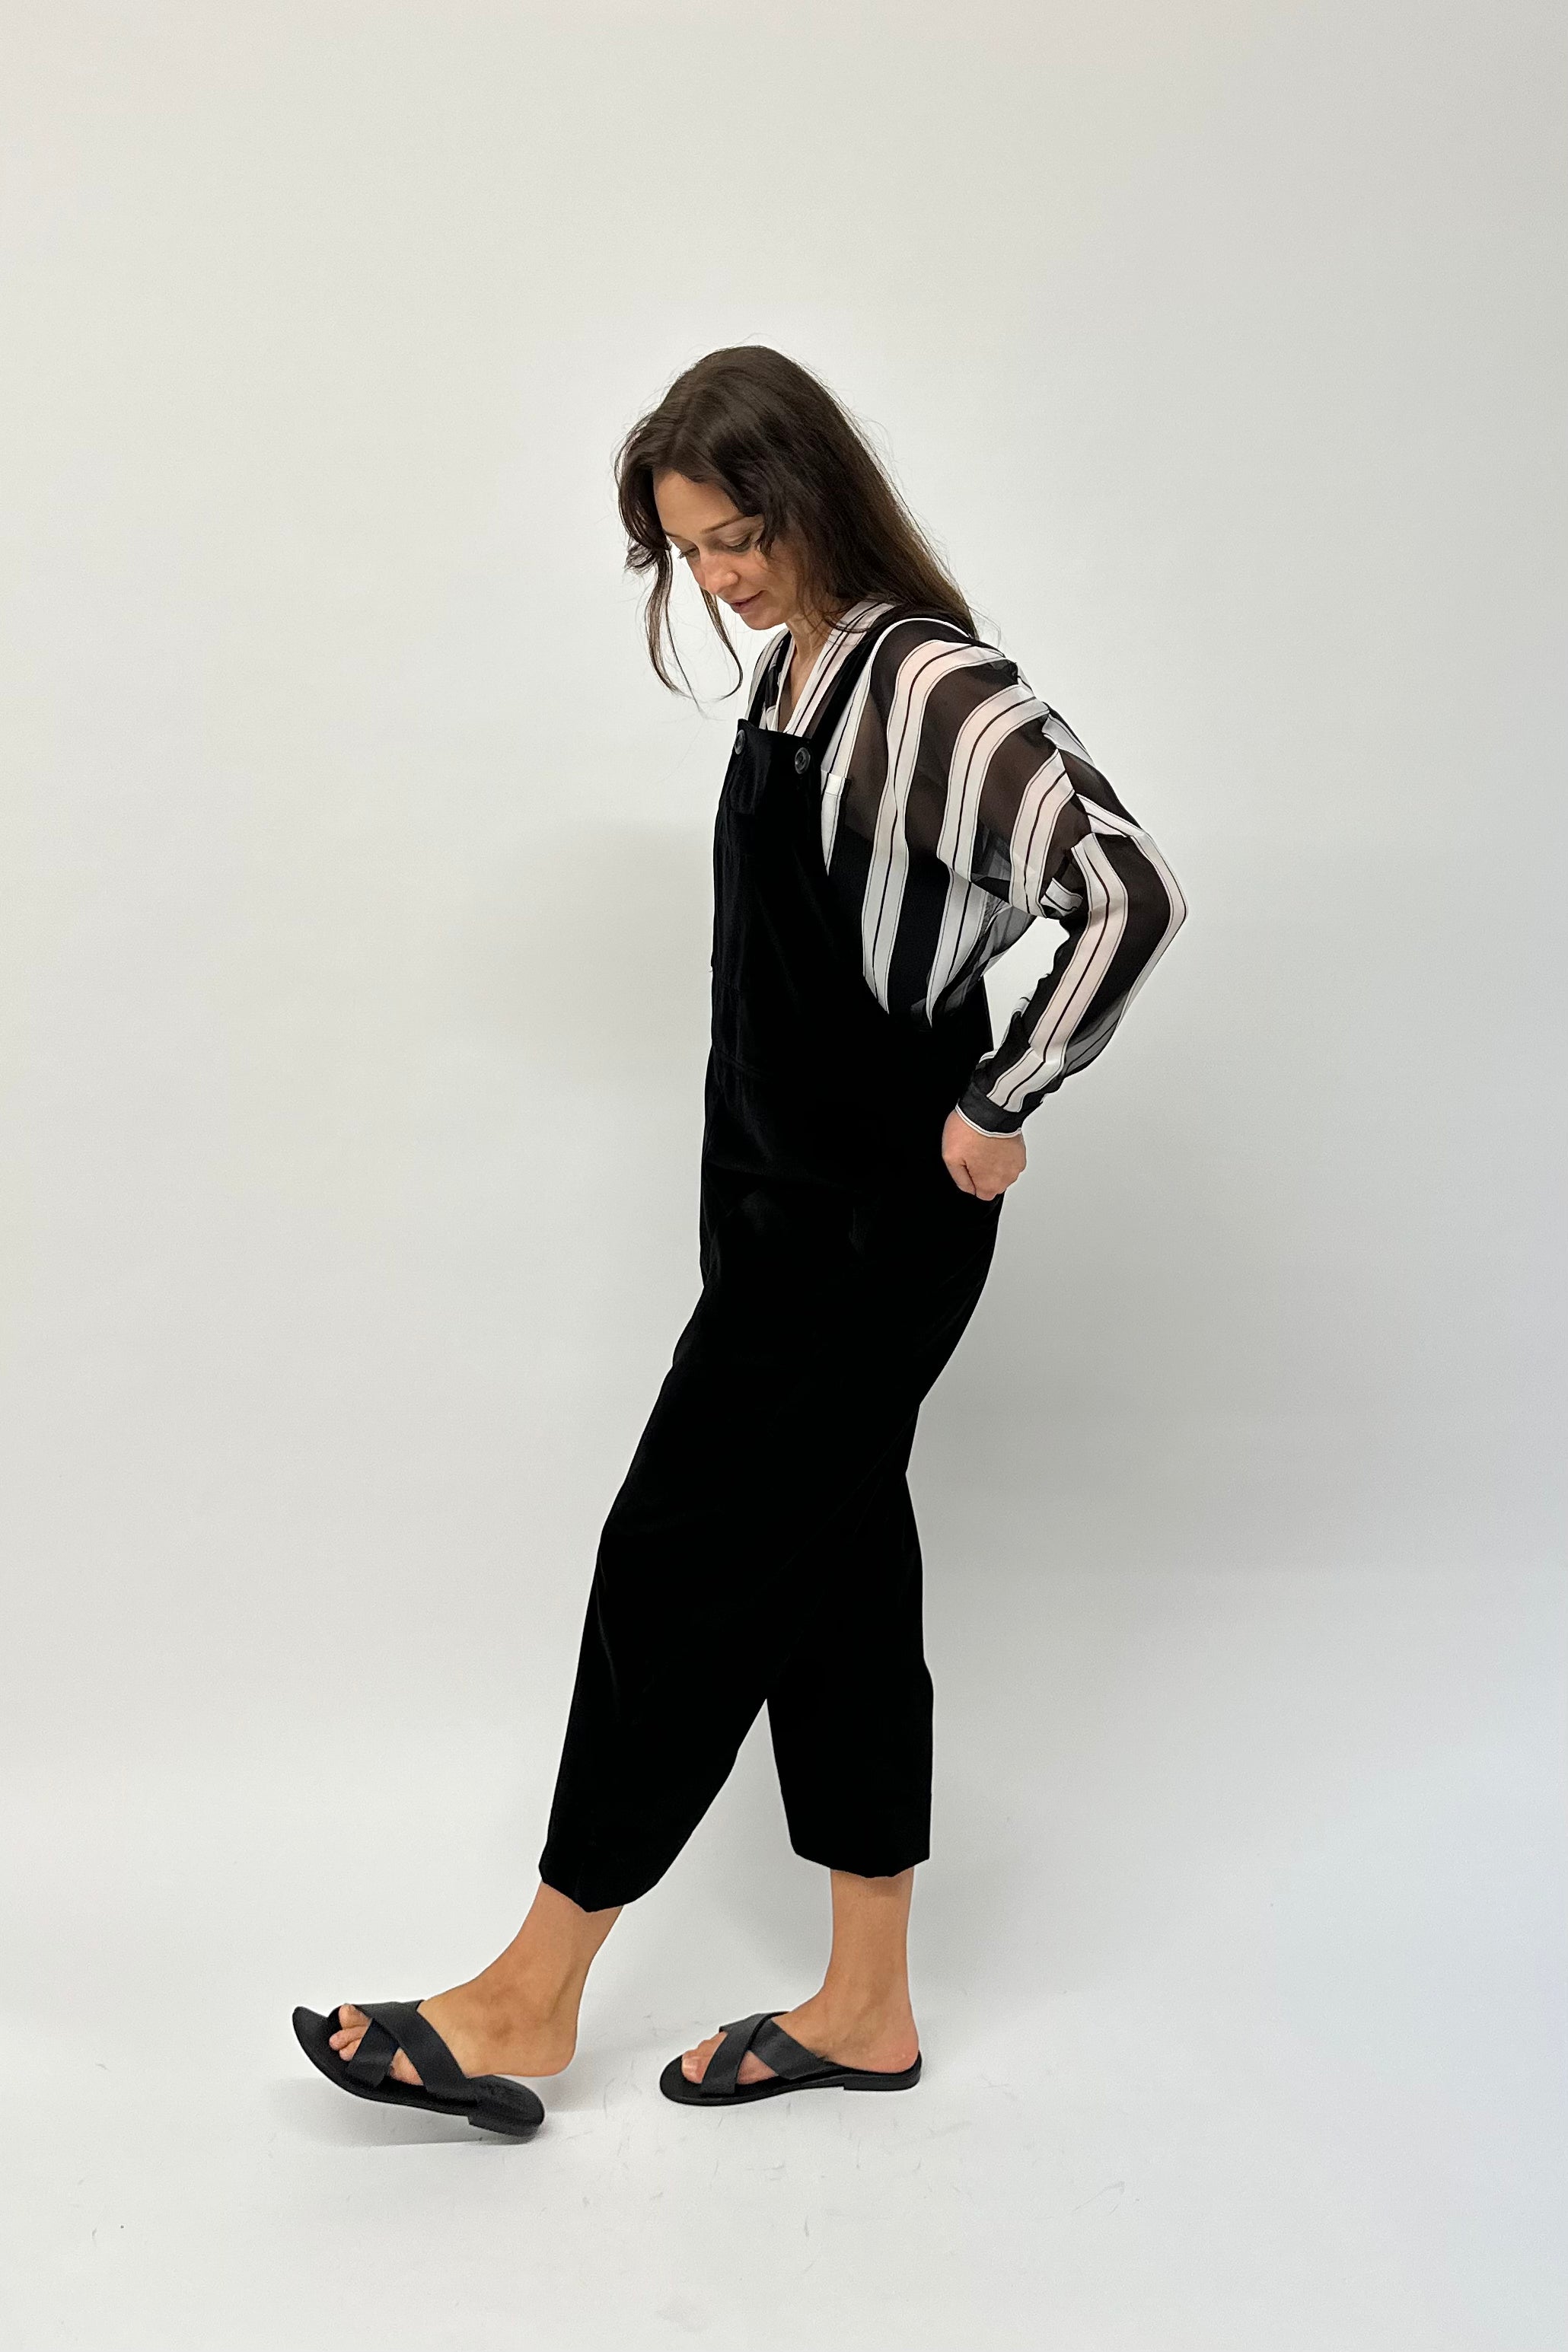 Sustainable fashion overalls made in Australia.